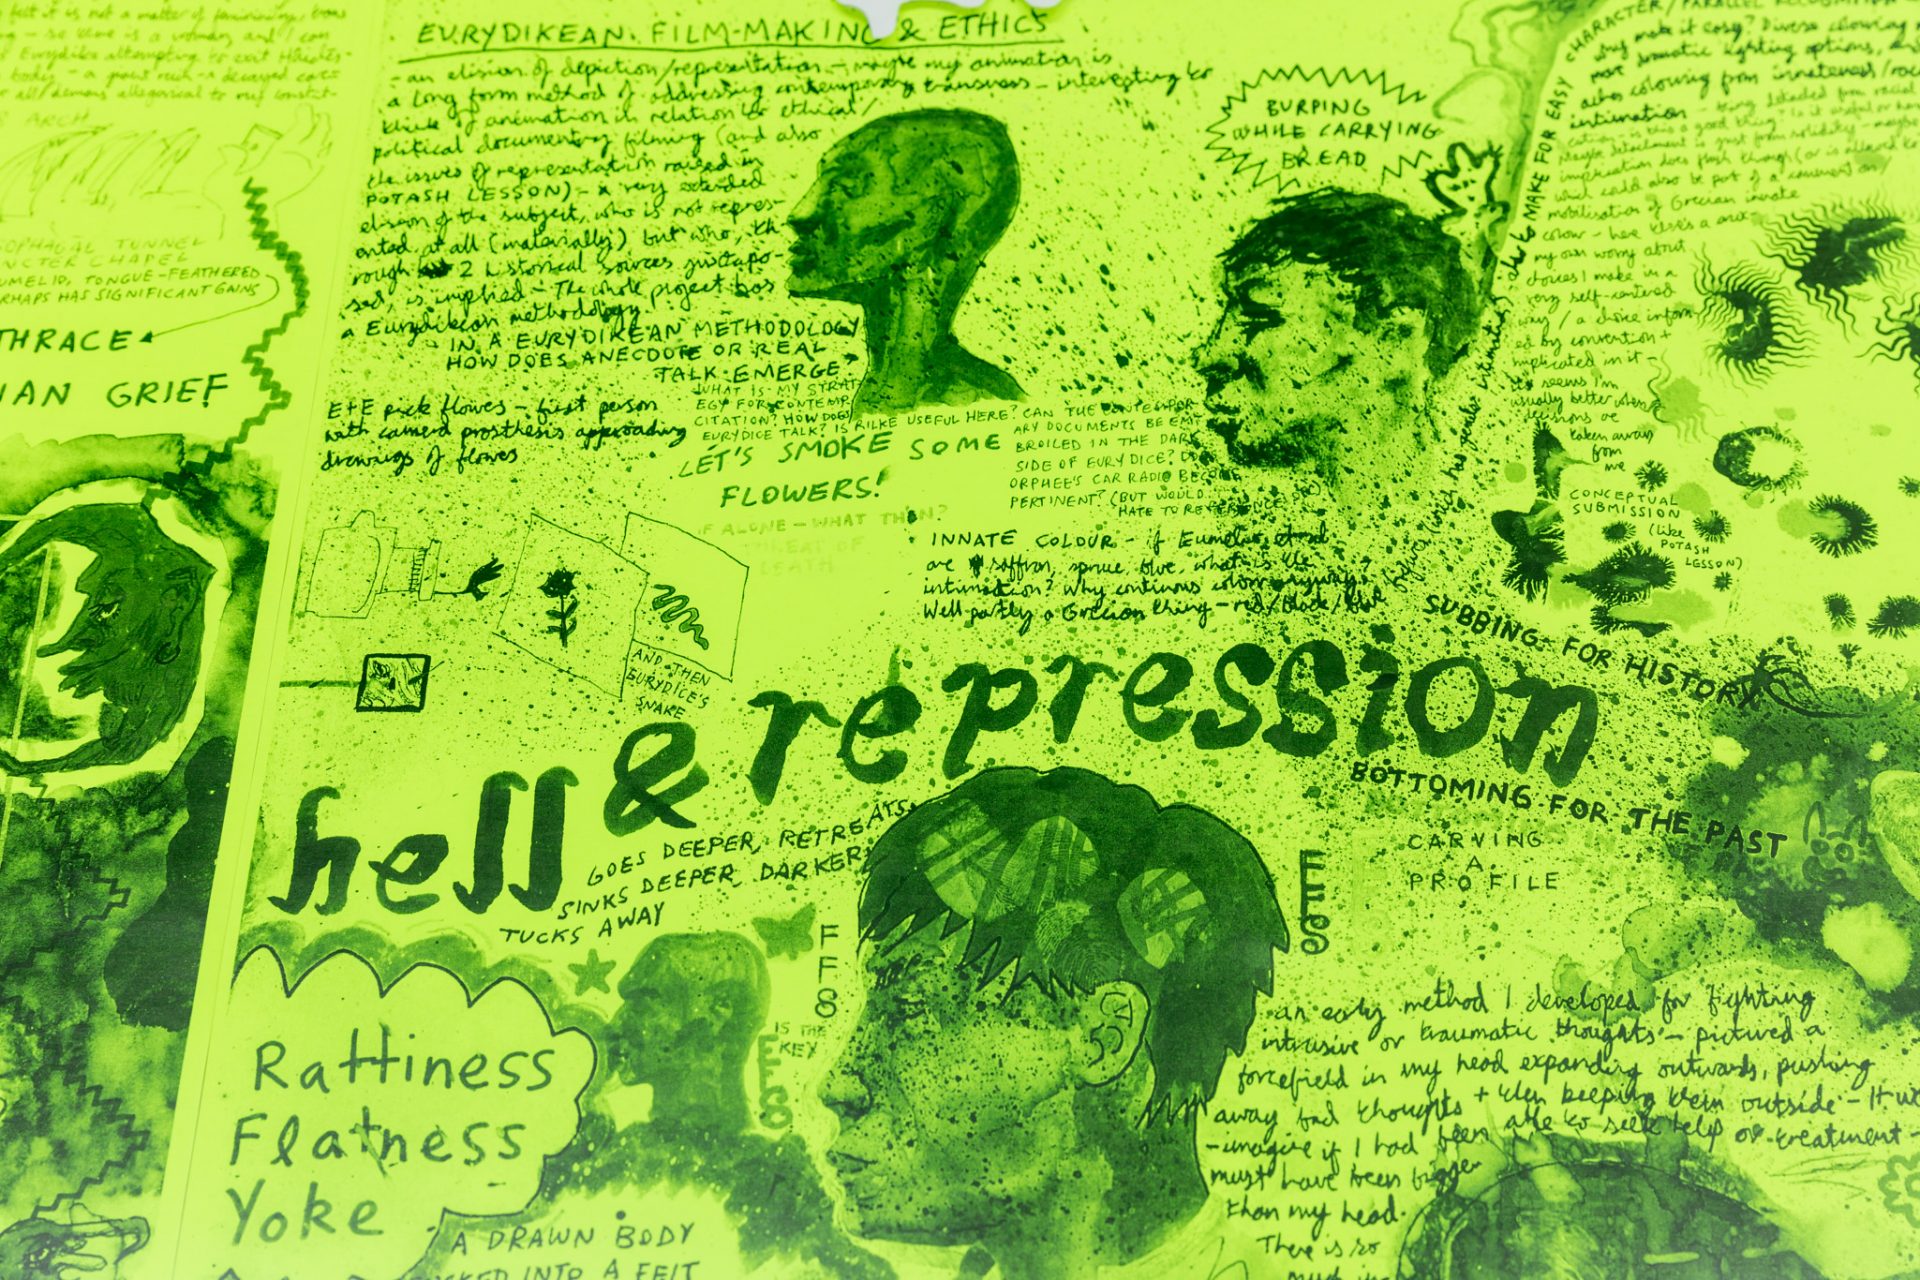 Flourescent yellow paper inscribed with handrawn texts of different styles and scales. "hell & repression" is writen across the centre of the image, and is surrounded with ornately handpainted profiles of human heads.